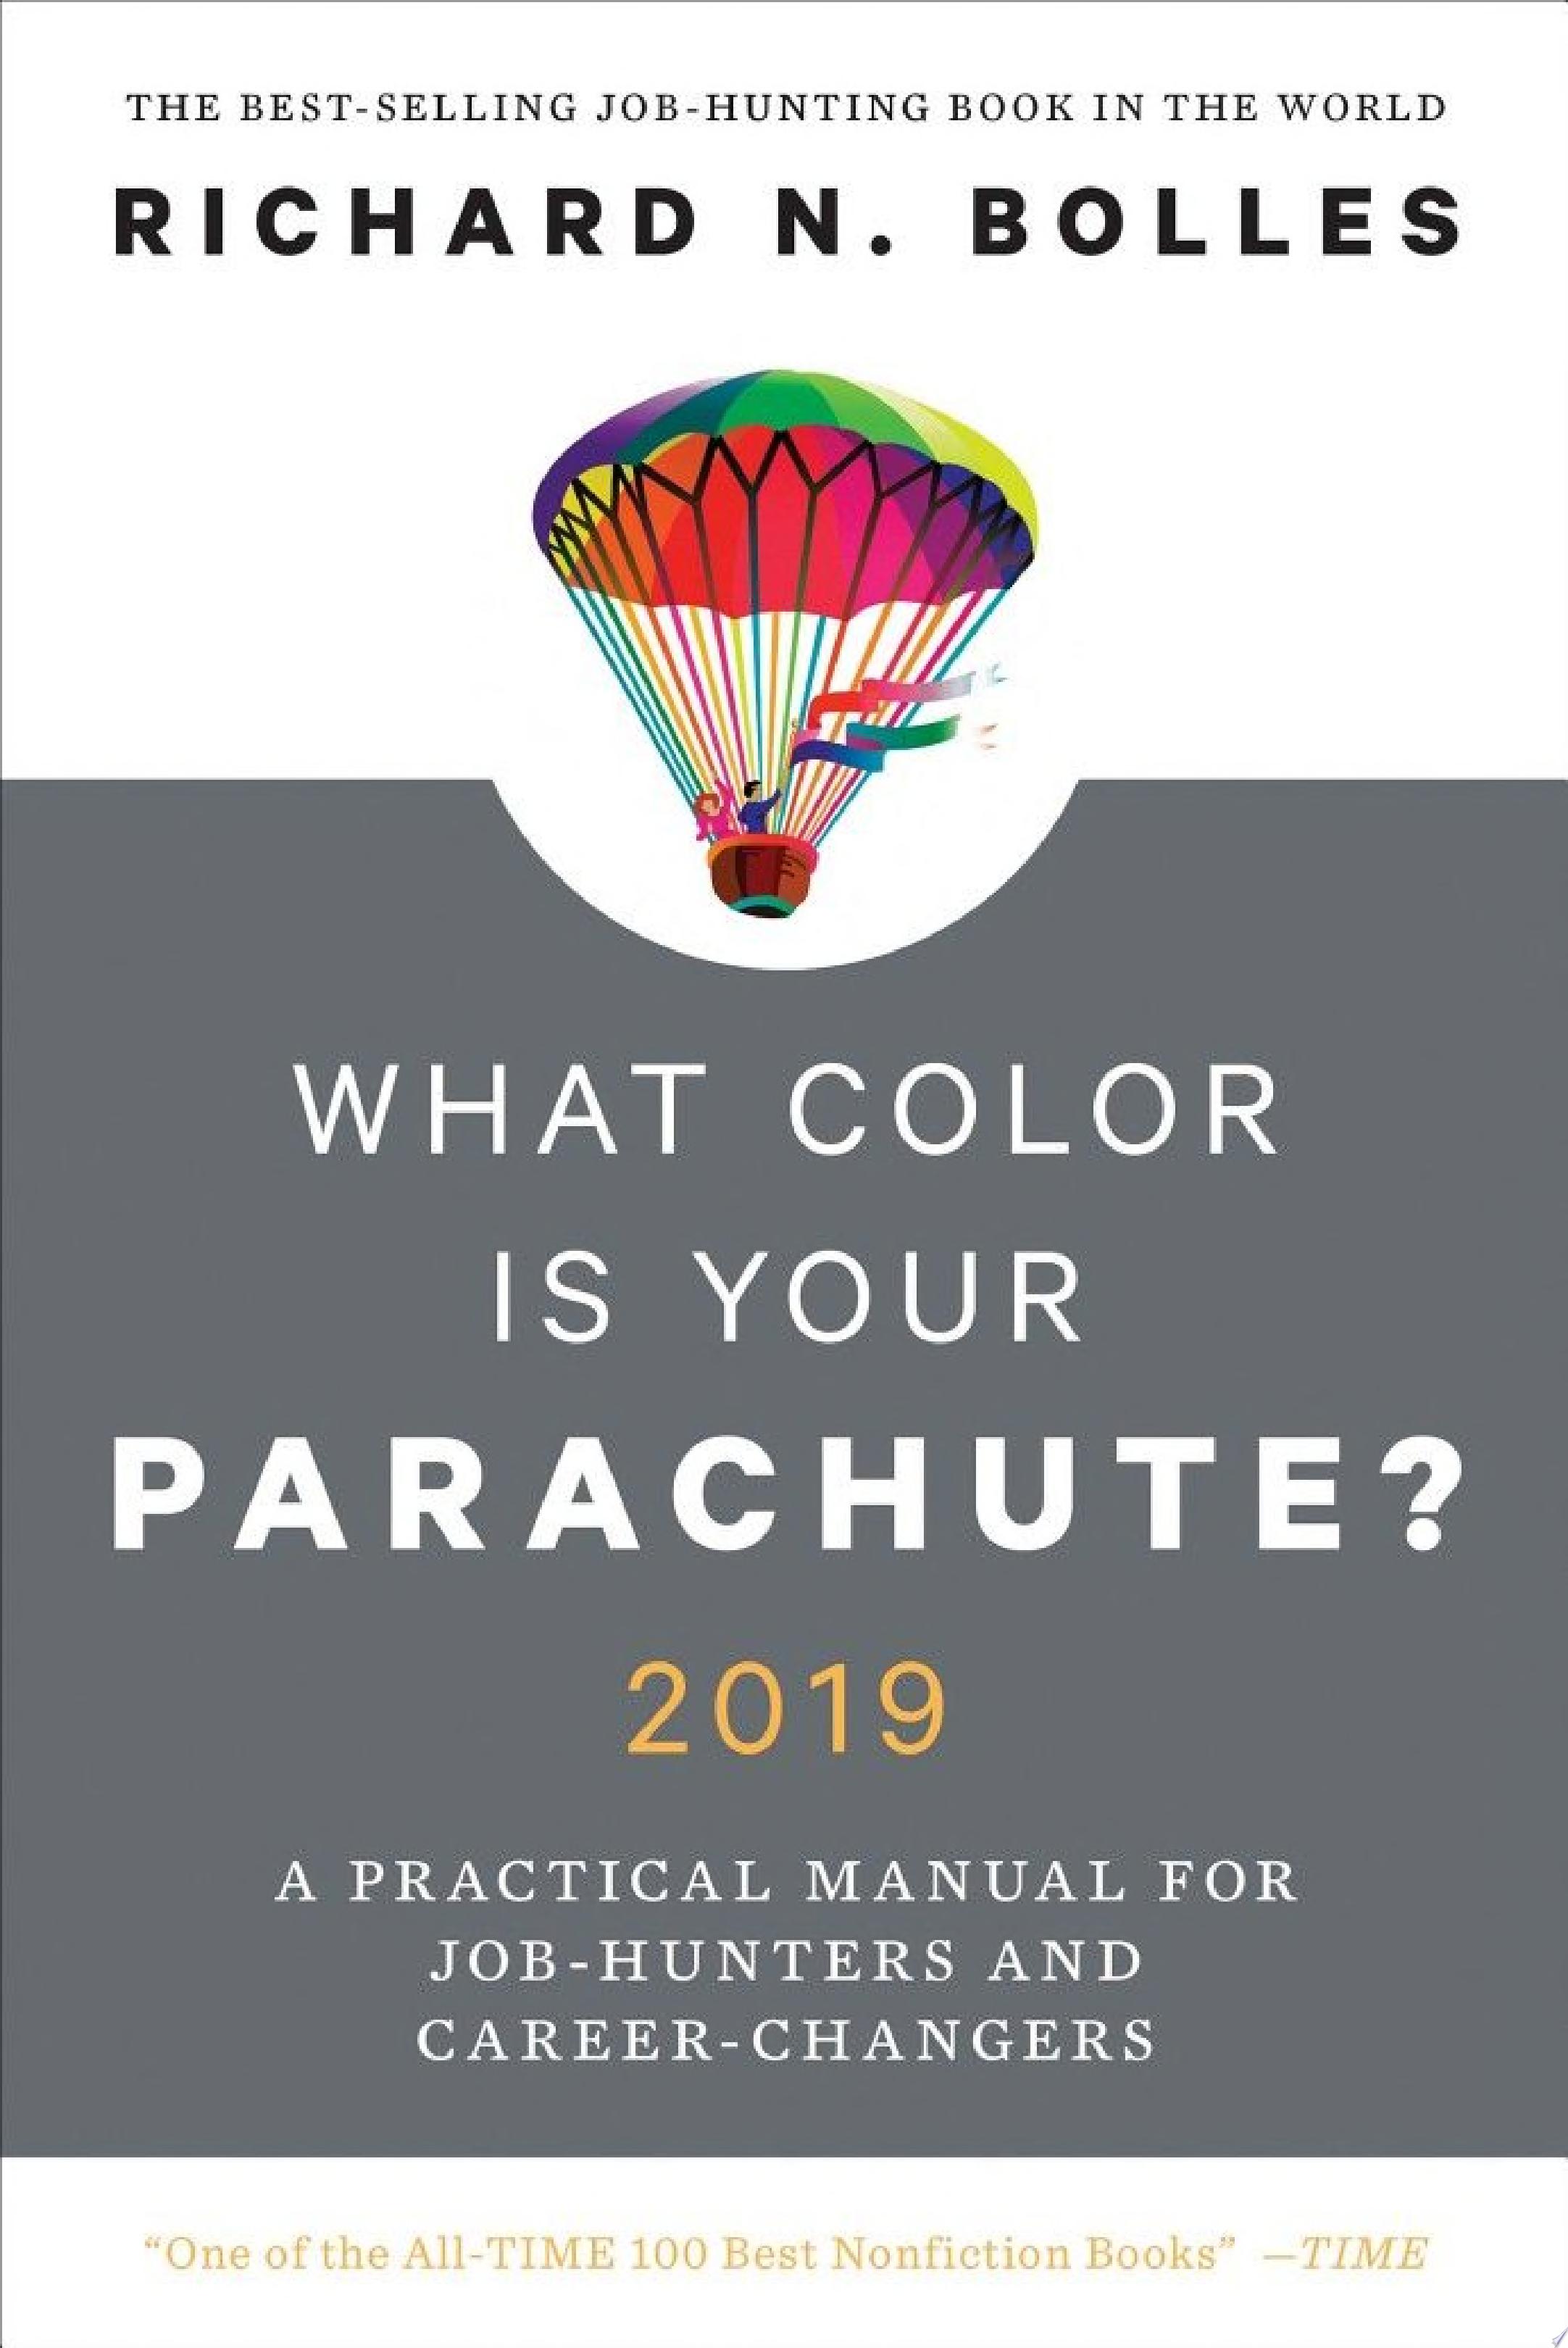 Image for "What Color Is Your Parachute? 2019"